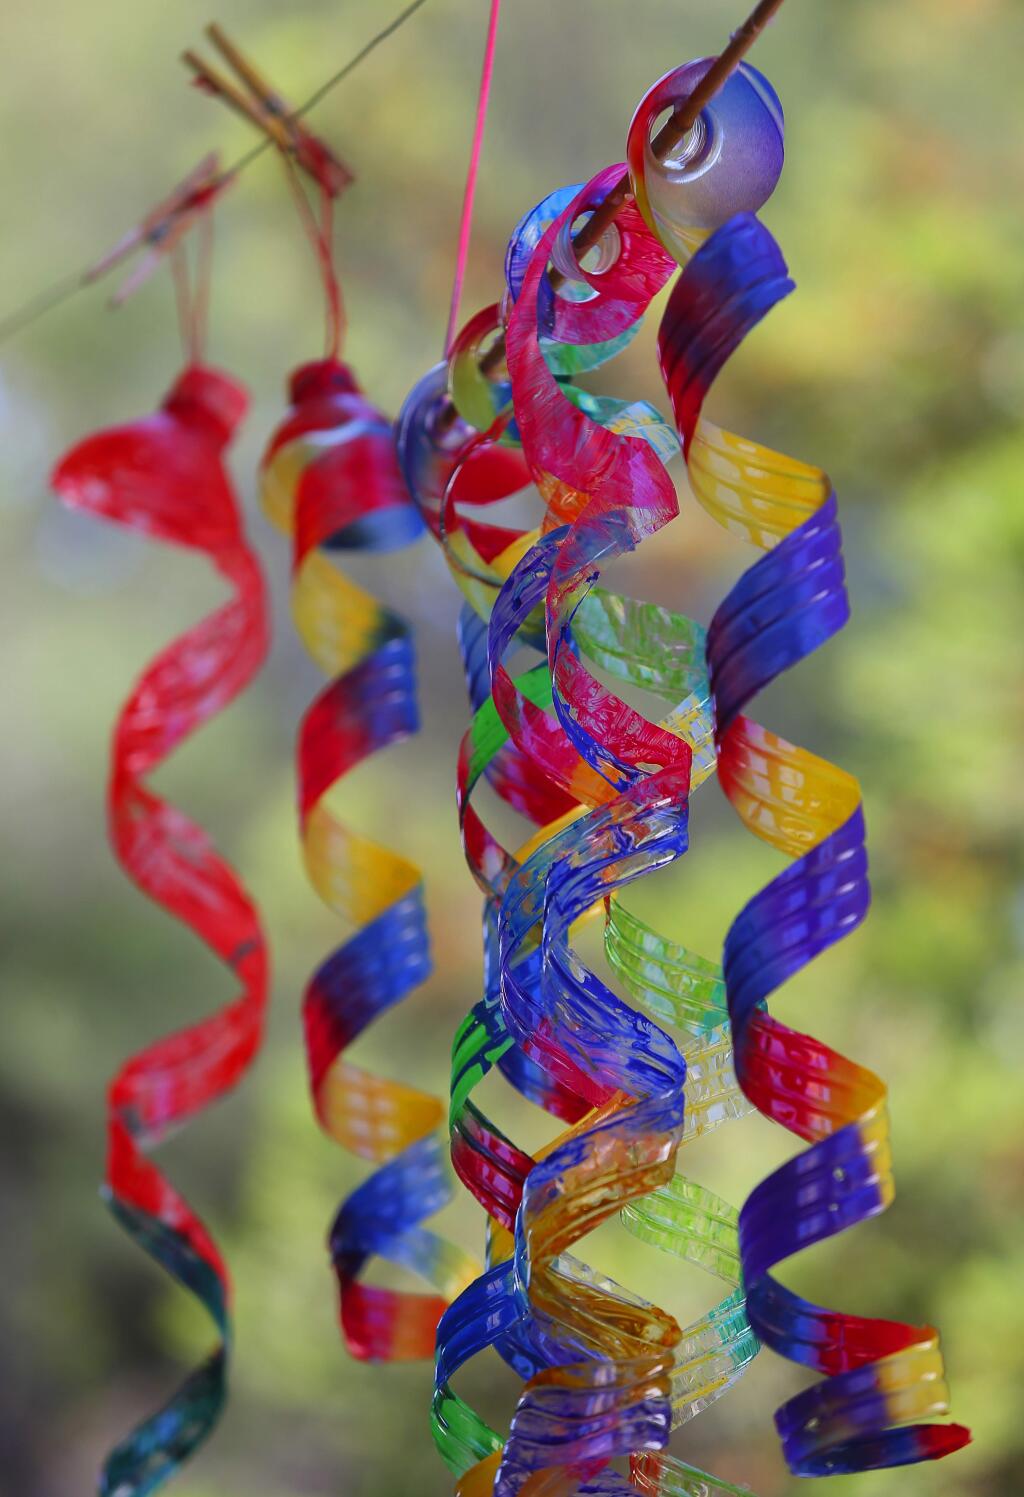 Colorful art made out of plastic bottles by students in the Art Escape 'Mexican Food and Decor' camp in Sonoma.(Christopher Chung/ The Press Democrat)